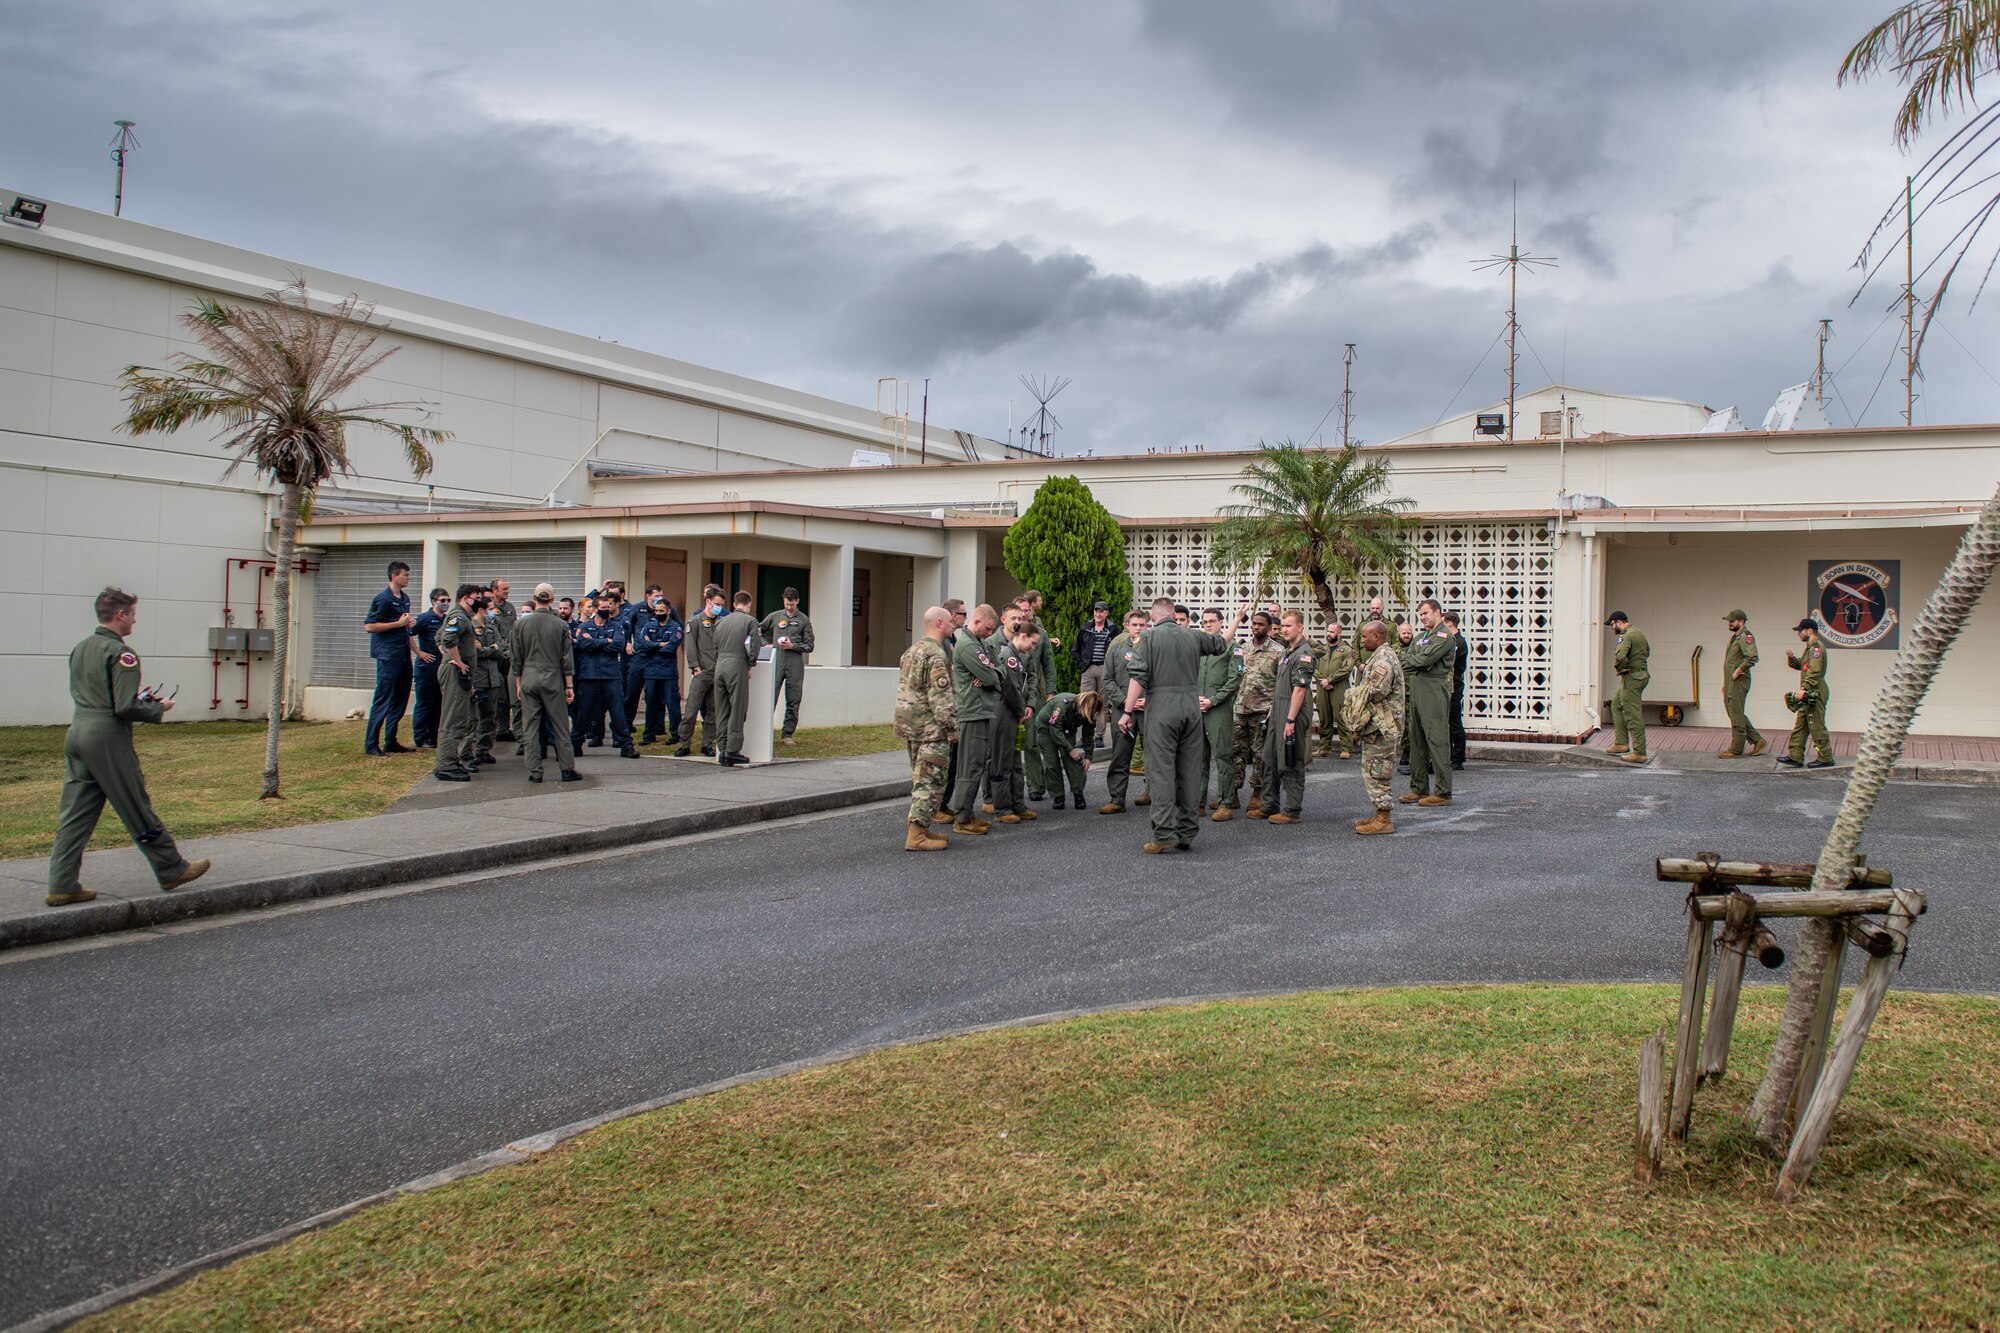 A group of military members from the U.S., New Zealand and Canada gather in front of a building